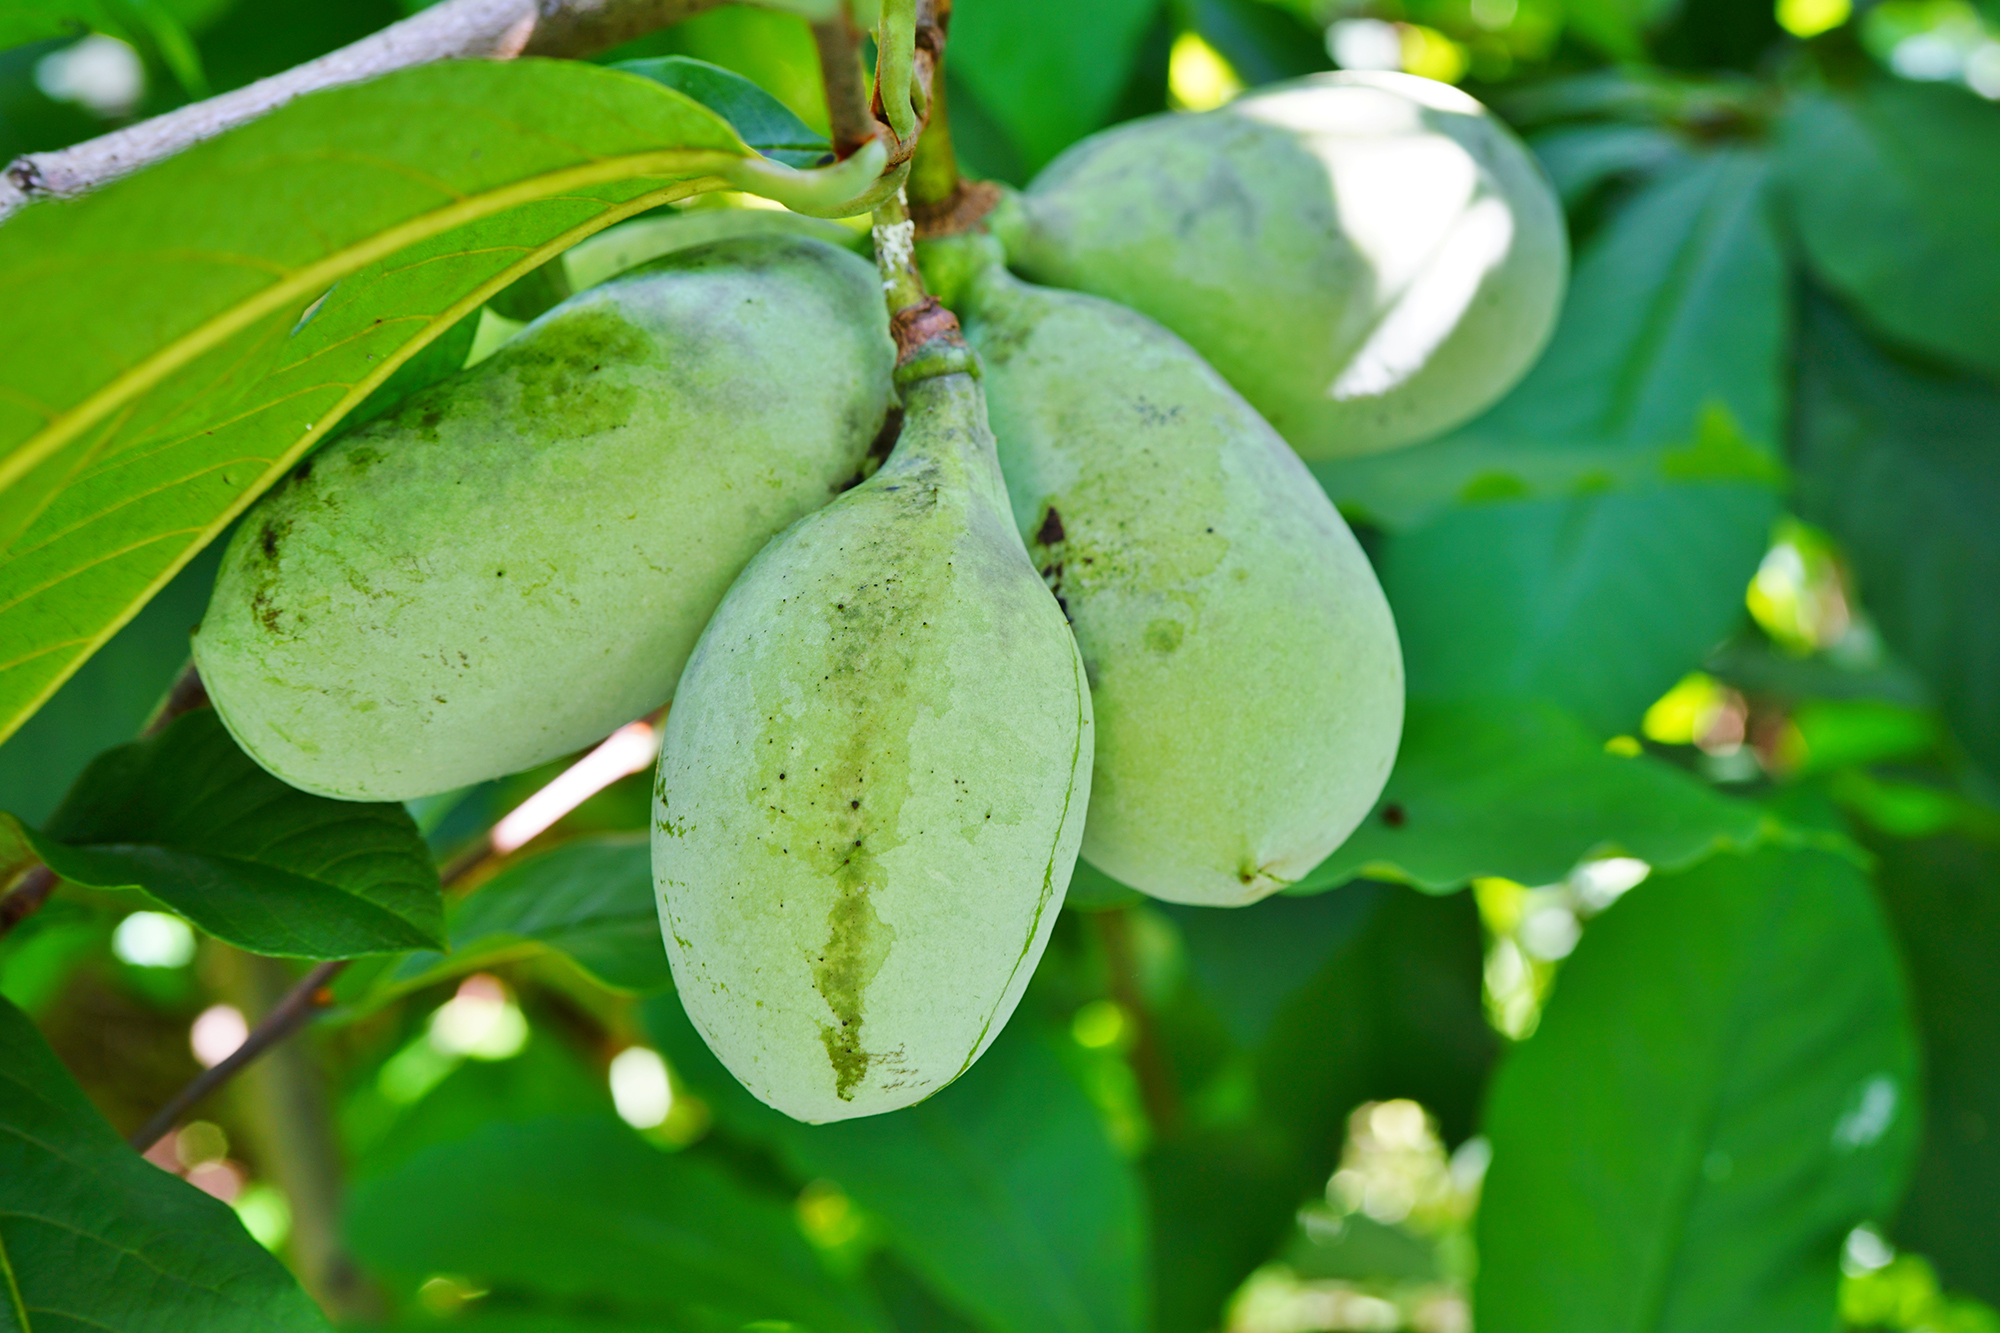 Four large bulbous green fruits on a tree.